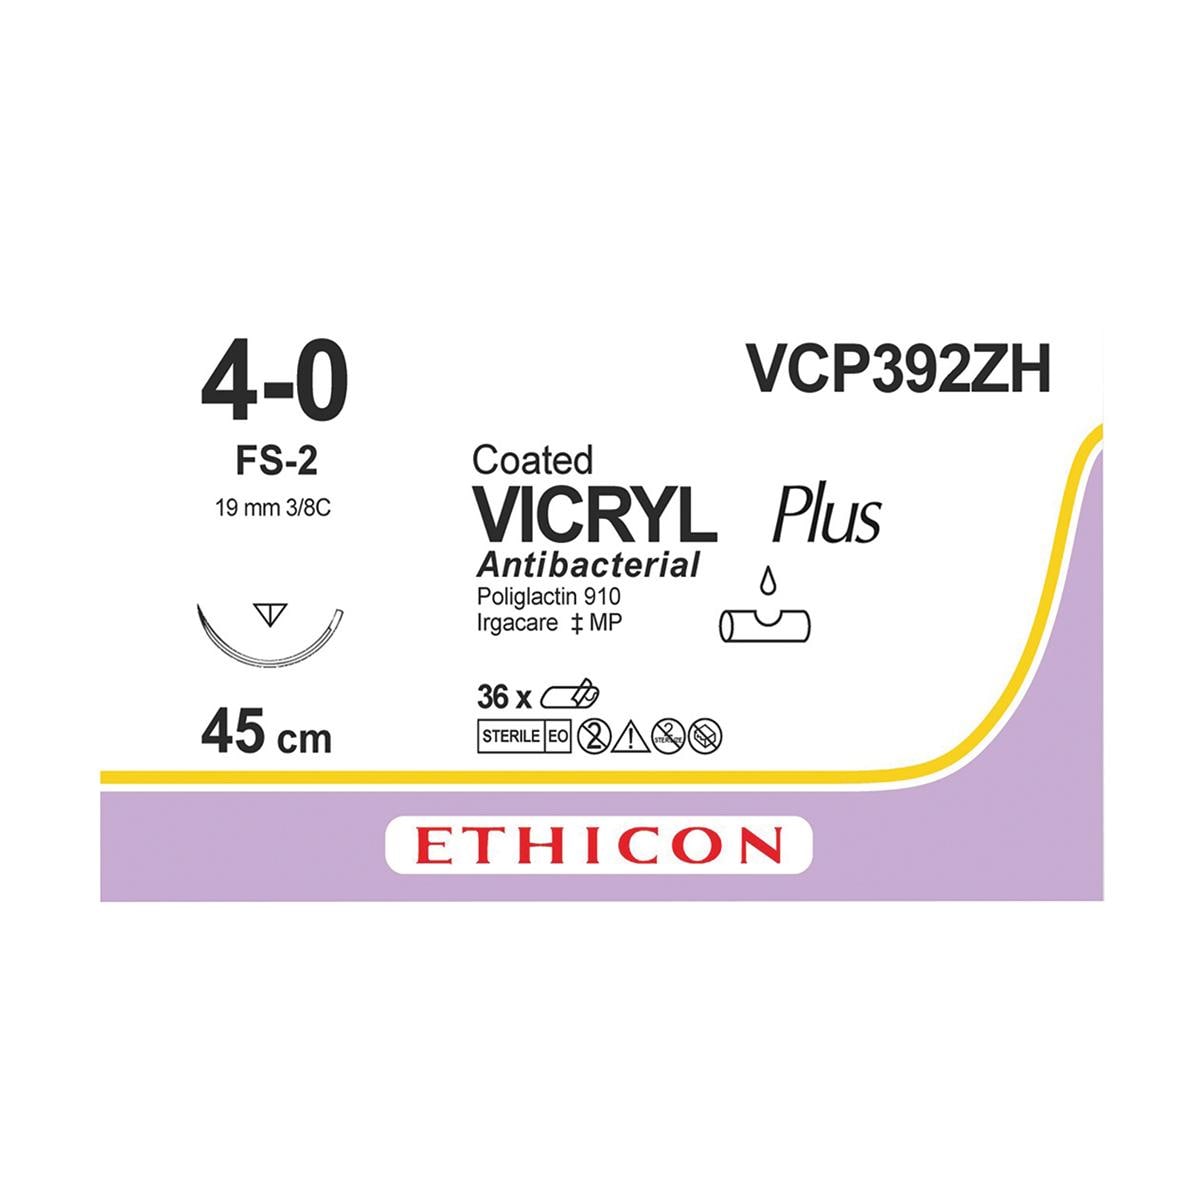 VICRYL Plus Sutures Violet Coated 45cm 4-0 3/8 Circle Reverse Cutting FS-2 19mm VCP392ZH 36pk